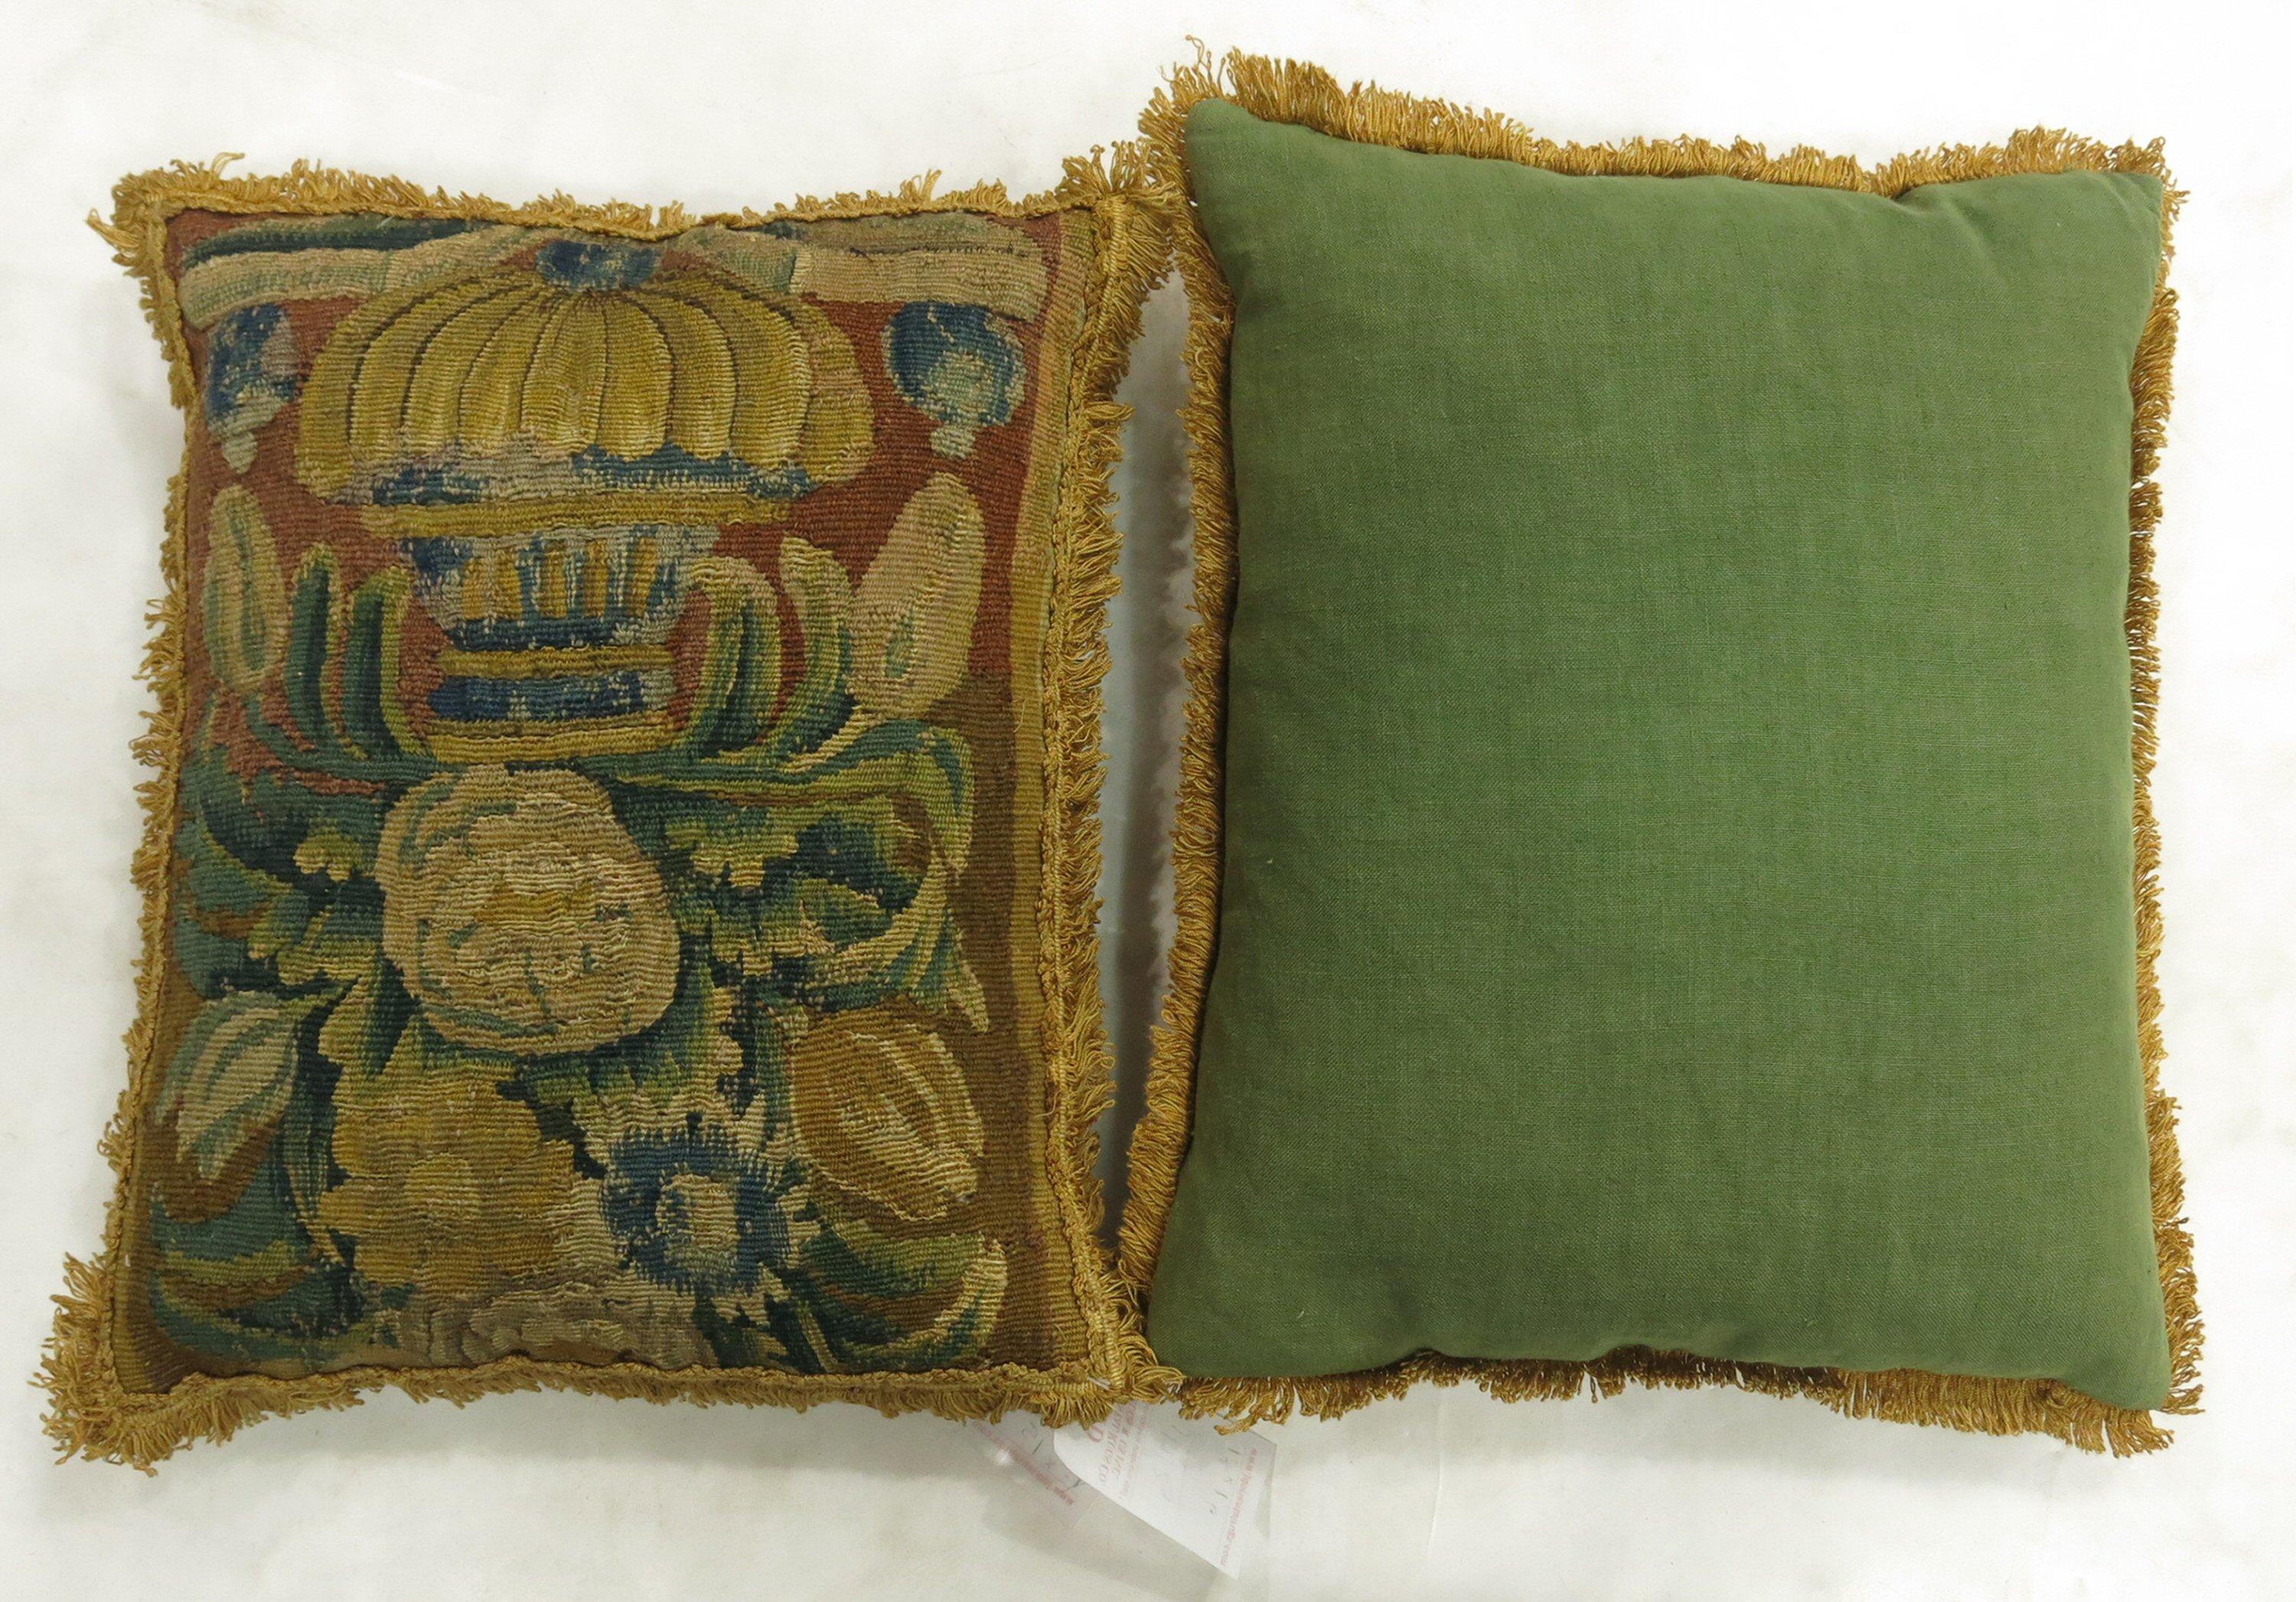 An exquisite set of 19th century green French tapestry verdure pillows woven wool with Fine quality wool and silk. Great colors and patina on both. 

Measuring 14'' x 17'' individually. Both have been sewn shut.